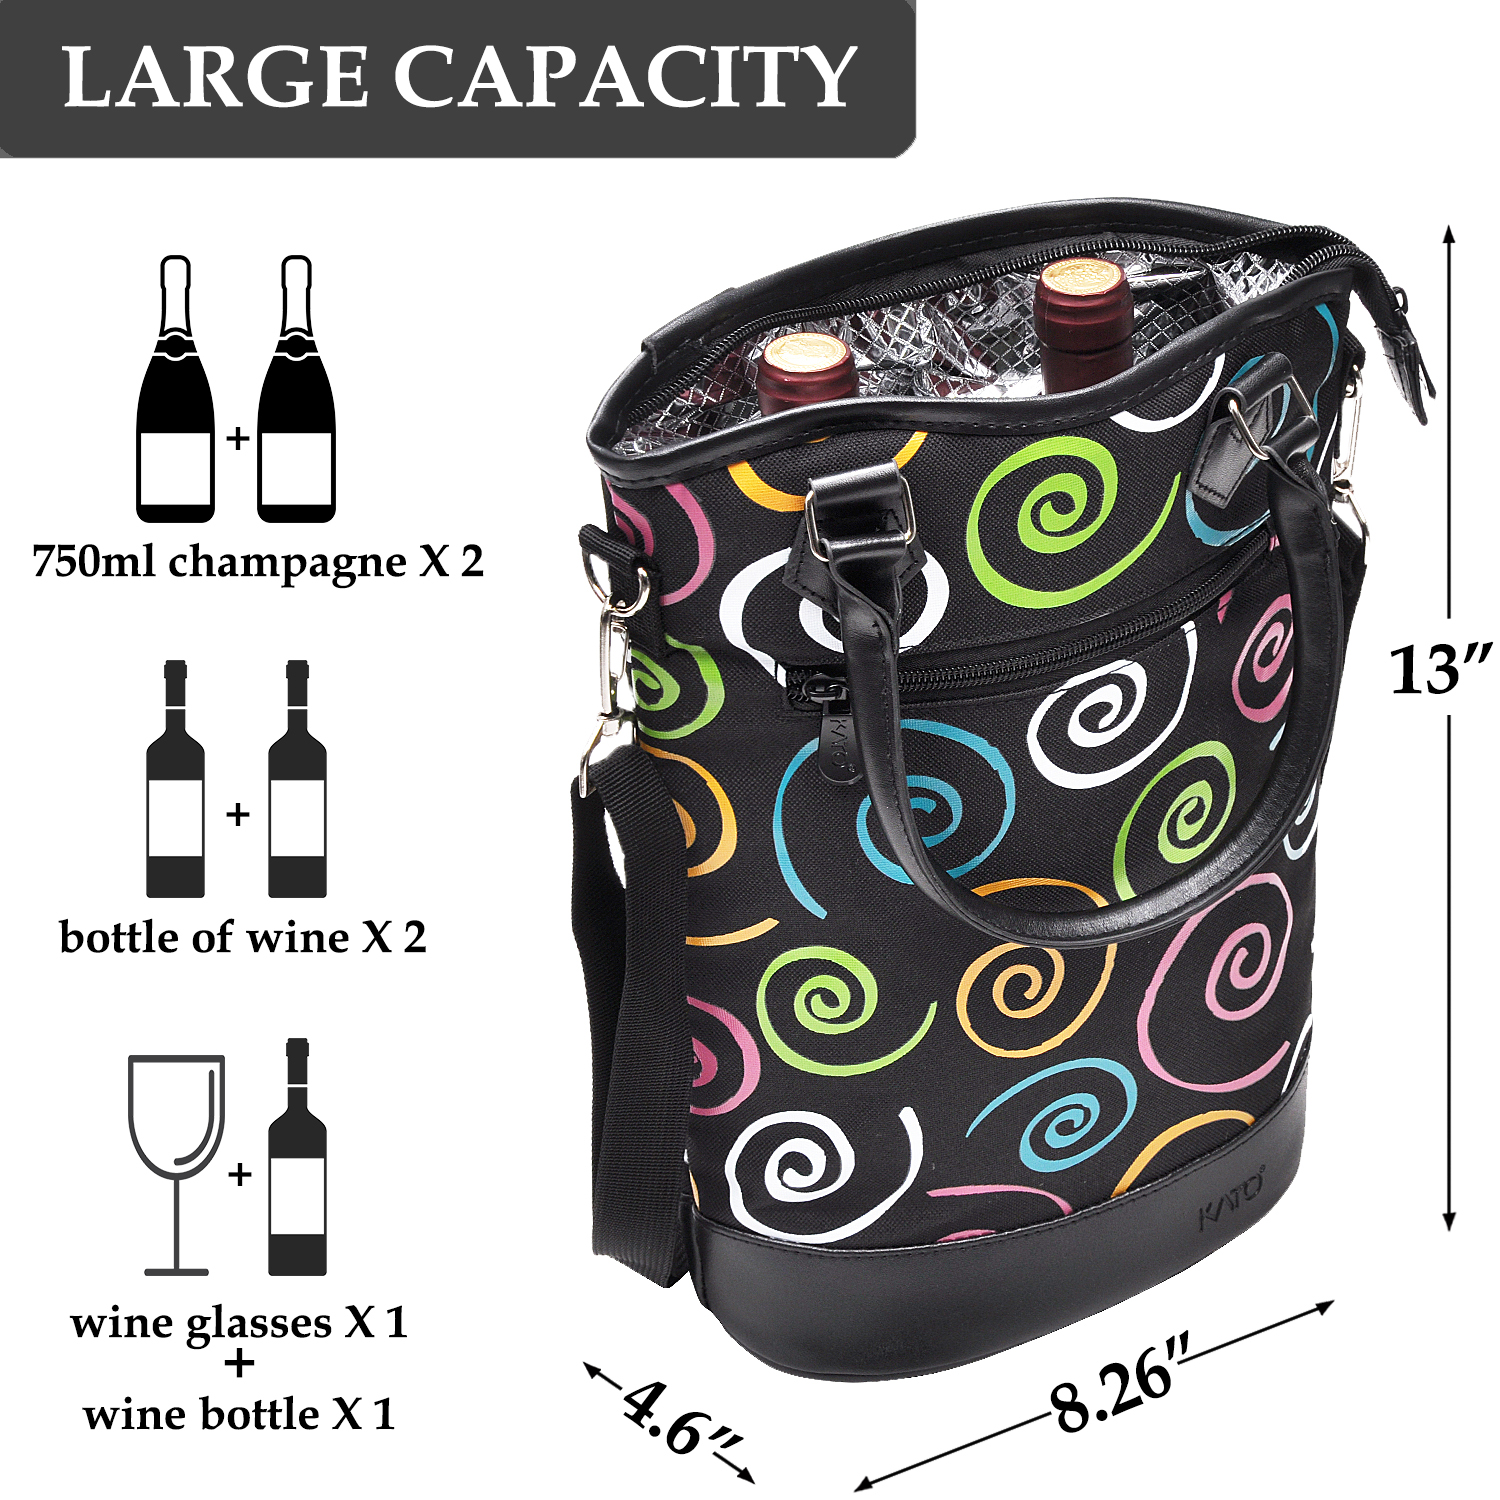 Tirrinia Insulated Wine Carrier Tote - Travel Padded 2 Bottle Wine/Champagne Cooler Bag with Handle and Adjustable Shoulder Strap + Free Corkscrew, Great Wine Lover Gift, SPIRAL - image 3 of 8